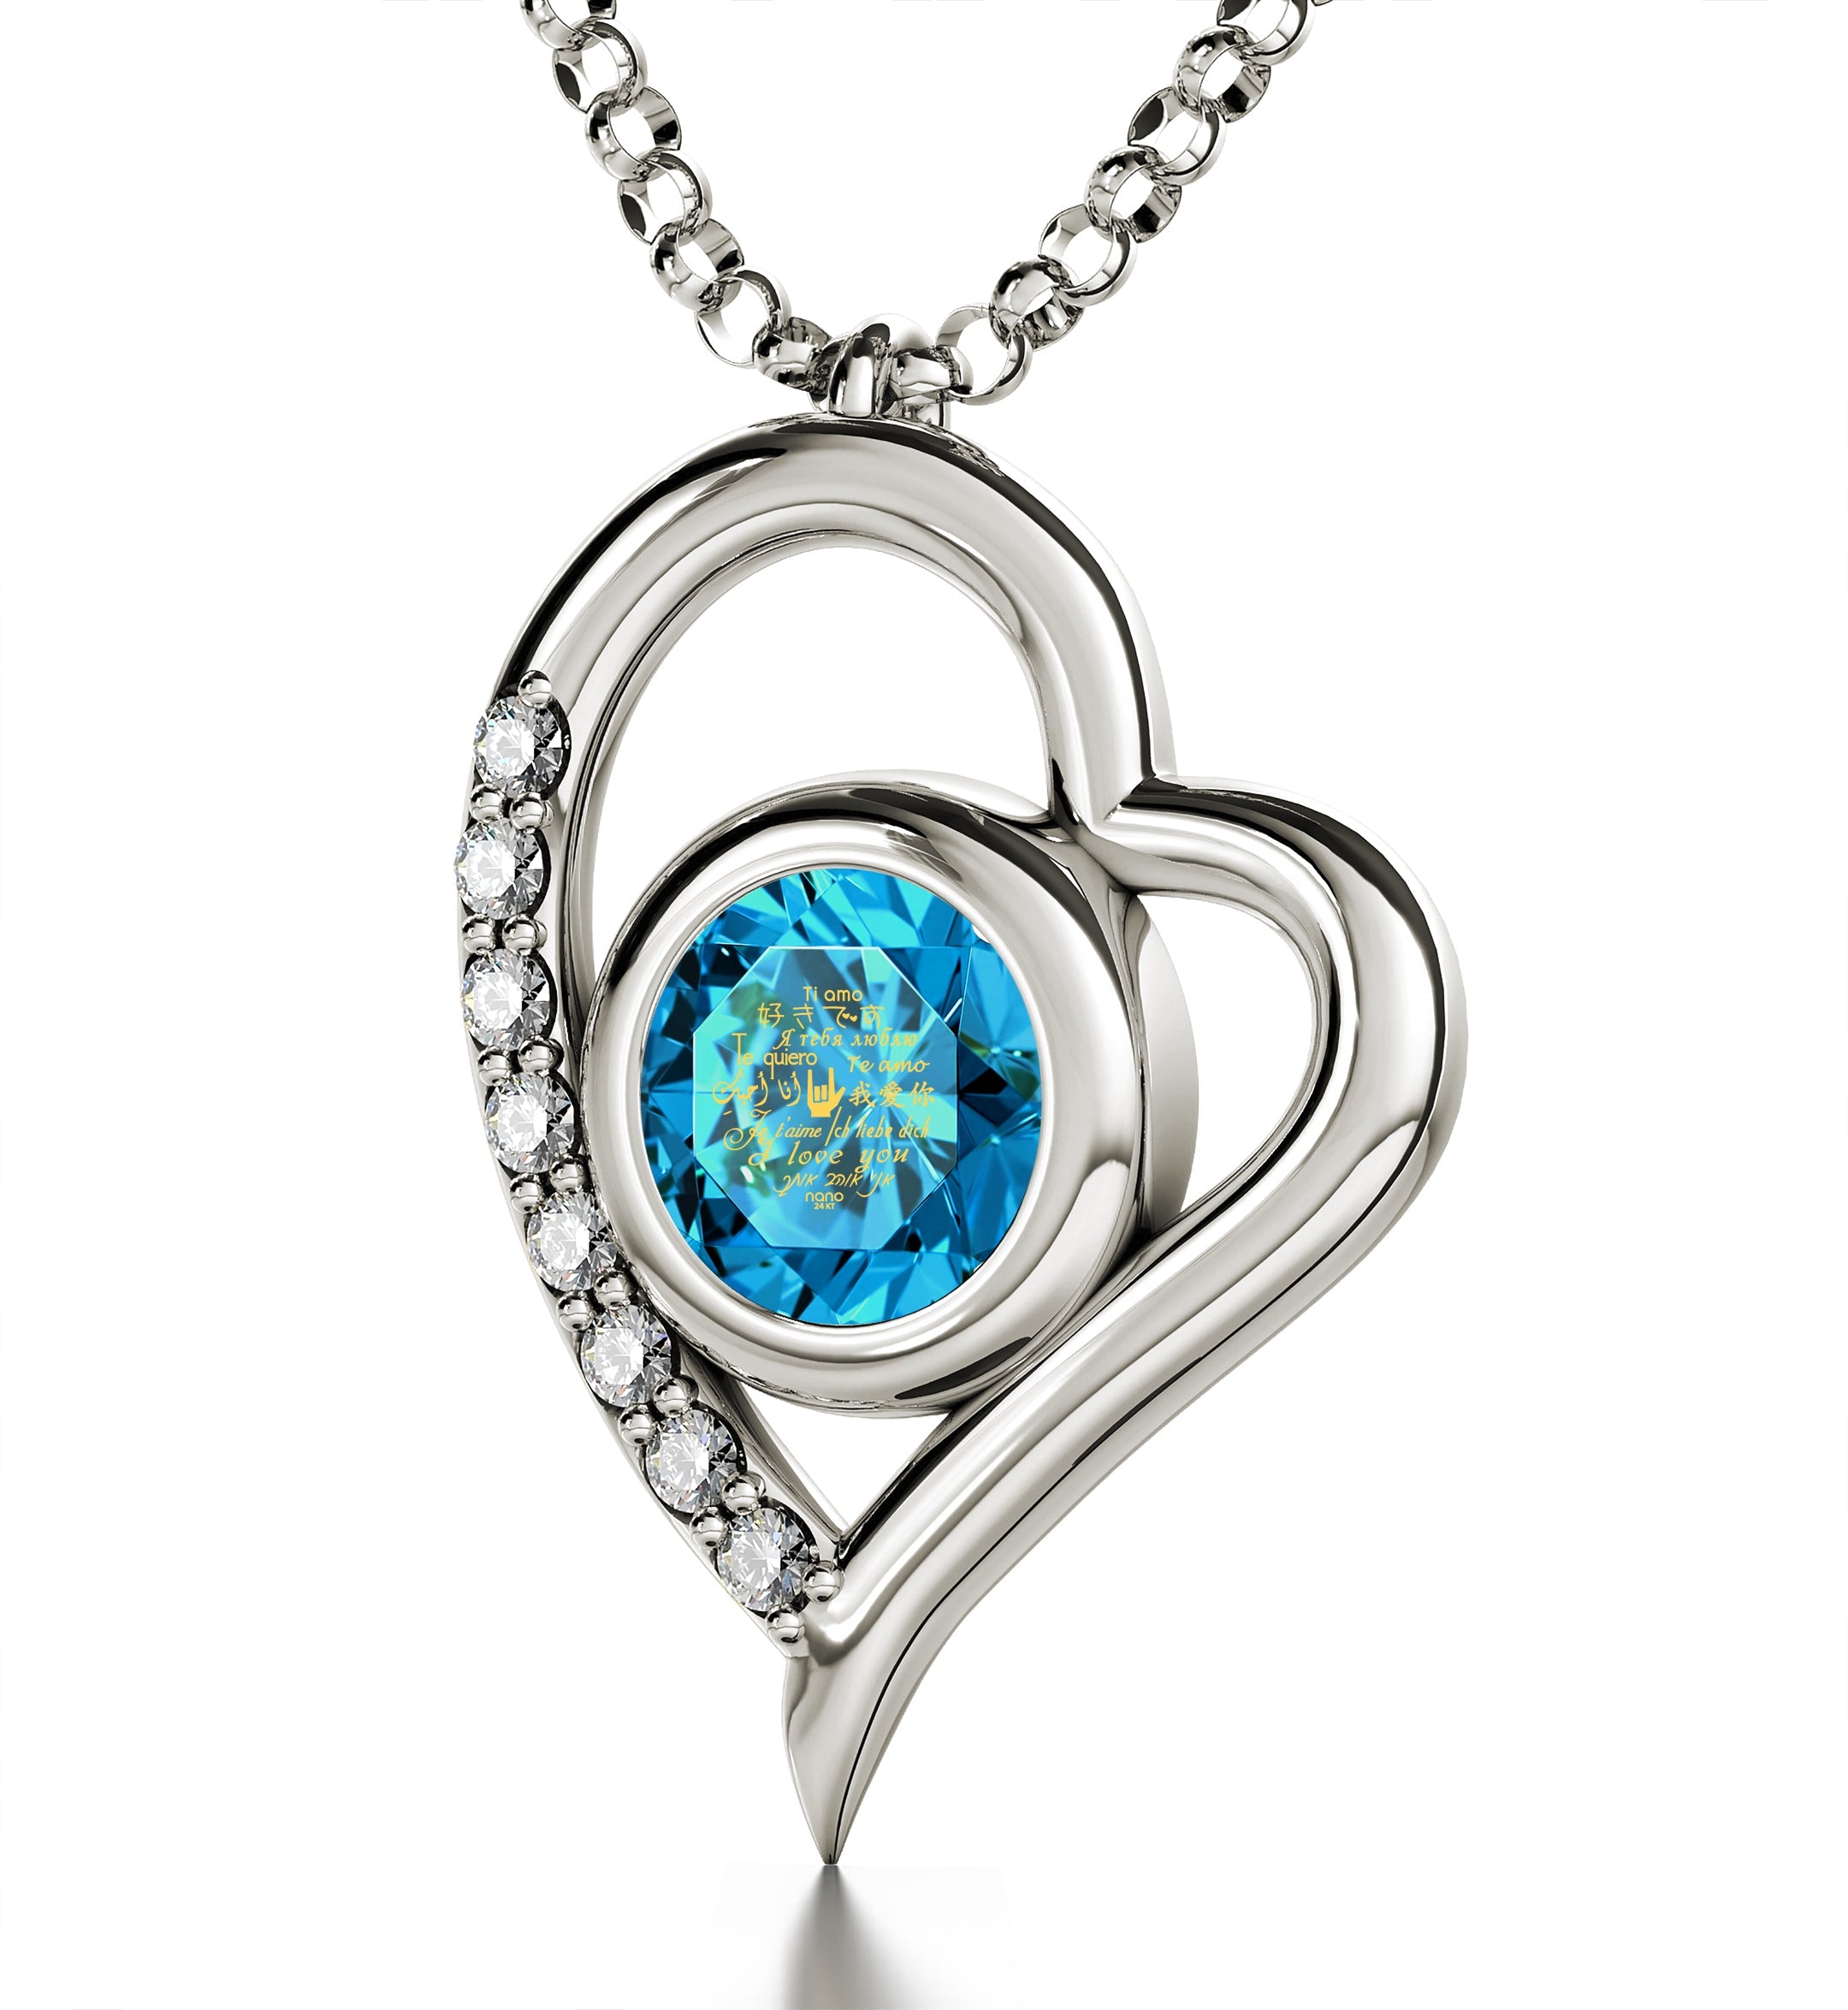 Close-up of a 925 Sterling Silver I Love You Heart Pendant Necklace with a blue gemstone engraved with "i love you" in multiple languages, encased in a silver setting.